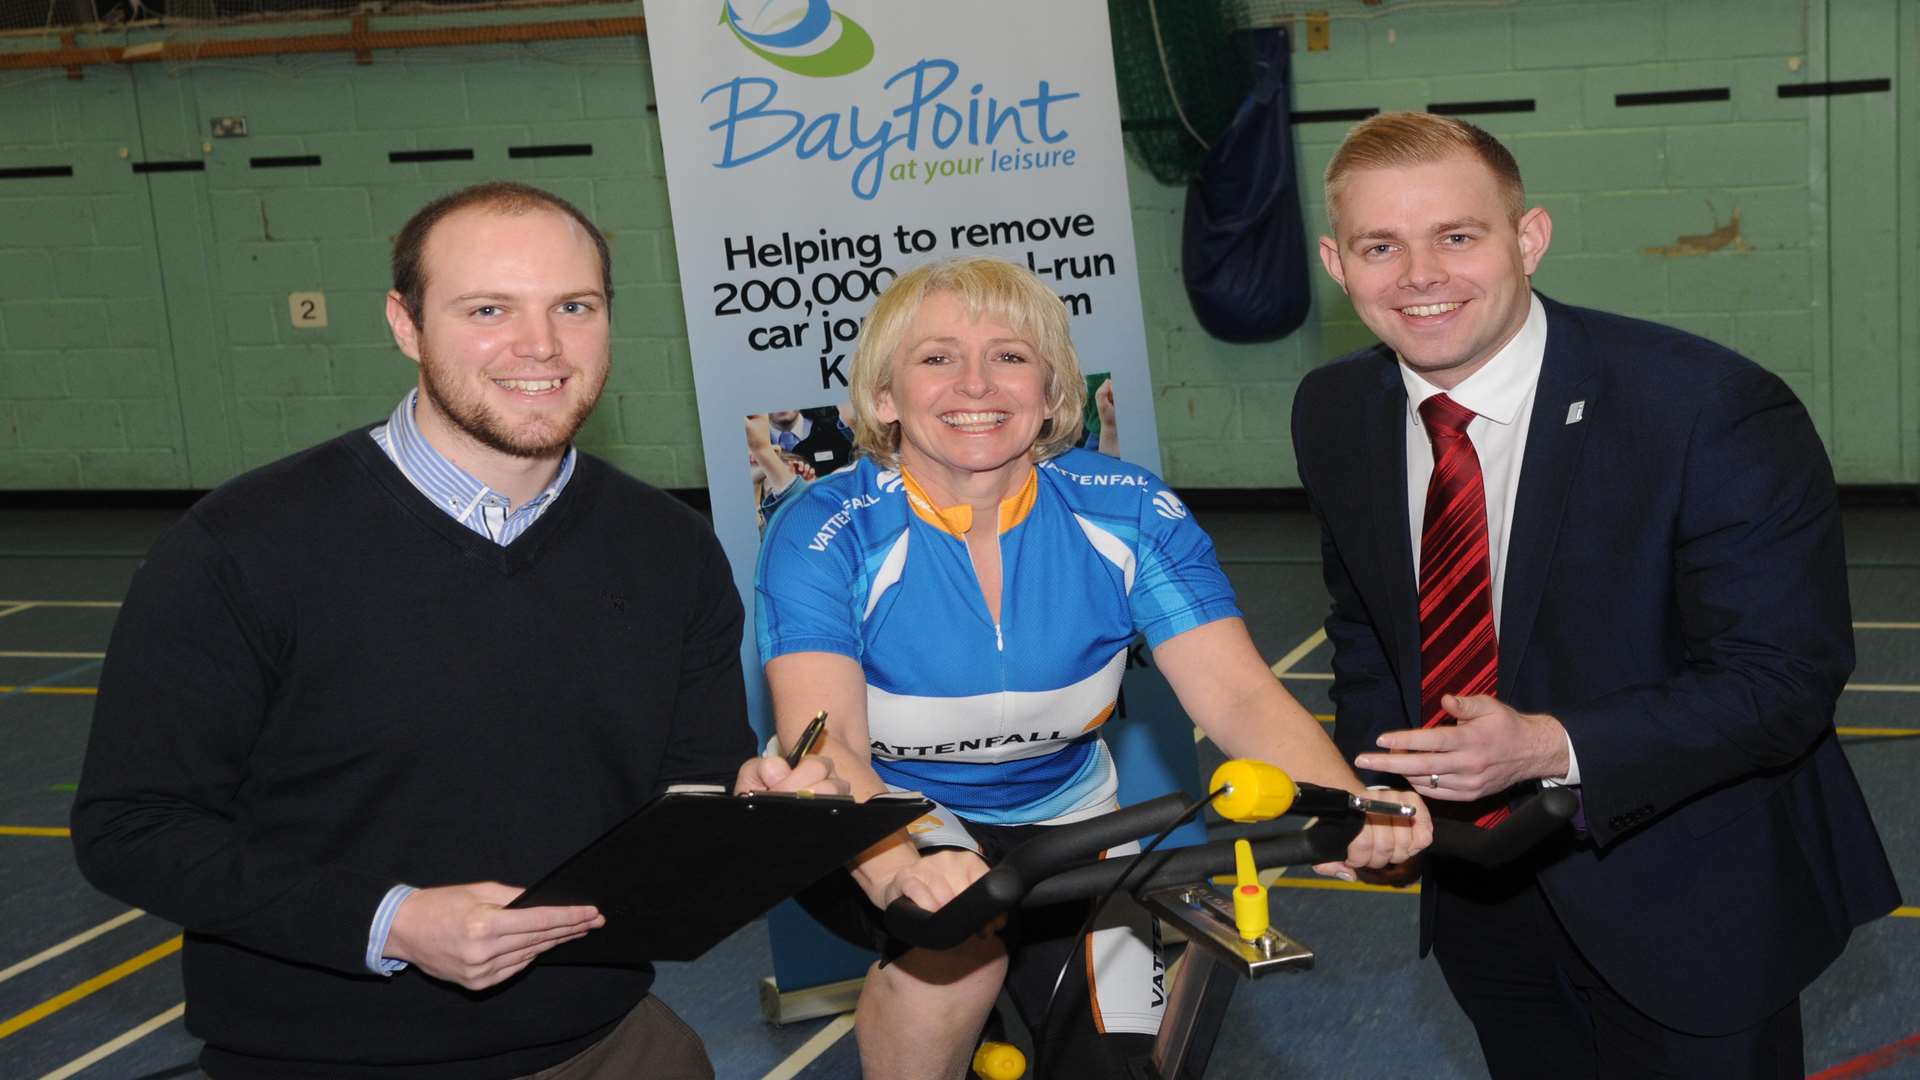 Sam Perkins of BayPoint (left) and Adam Smith of BMW put Vattenfall's Mel Rogers through her paces ahead of the KM Big Bike Ride on April 26.